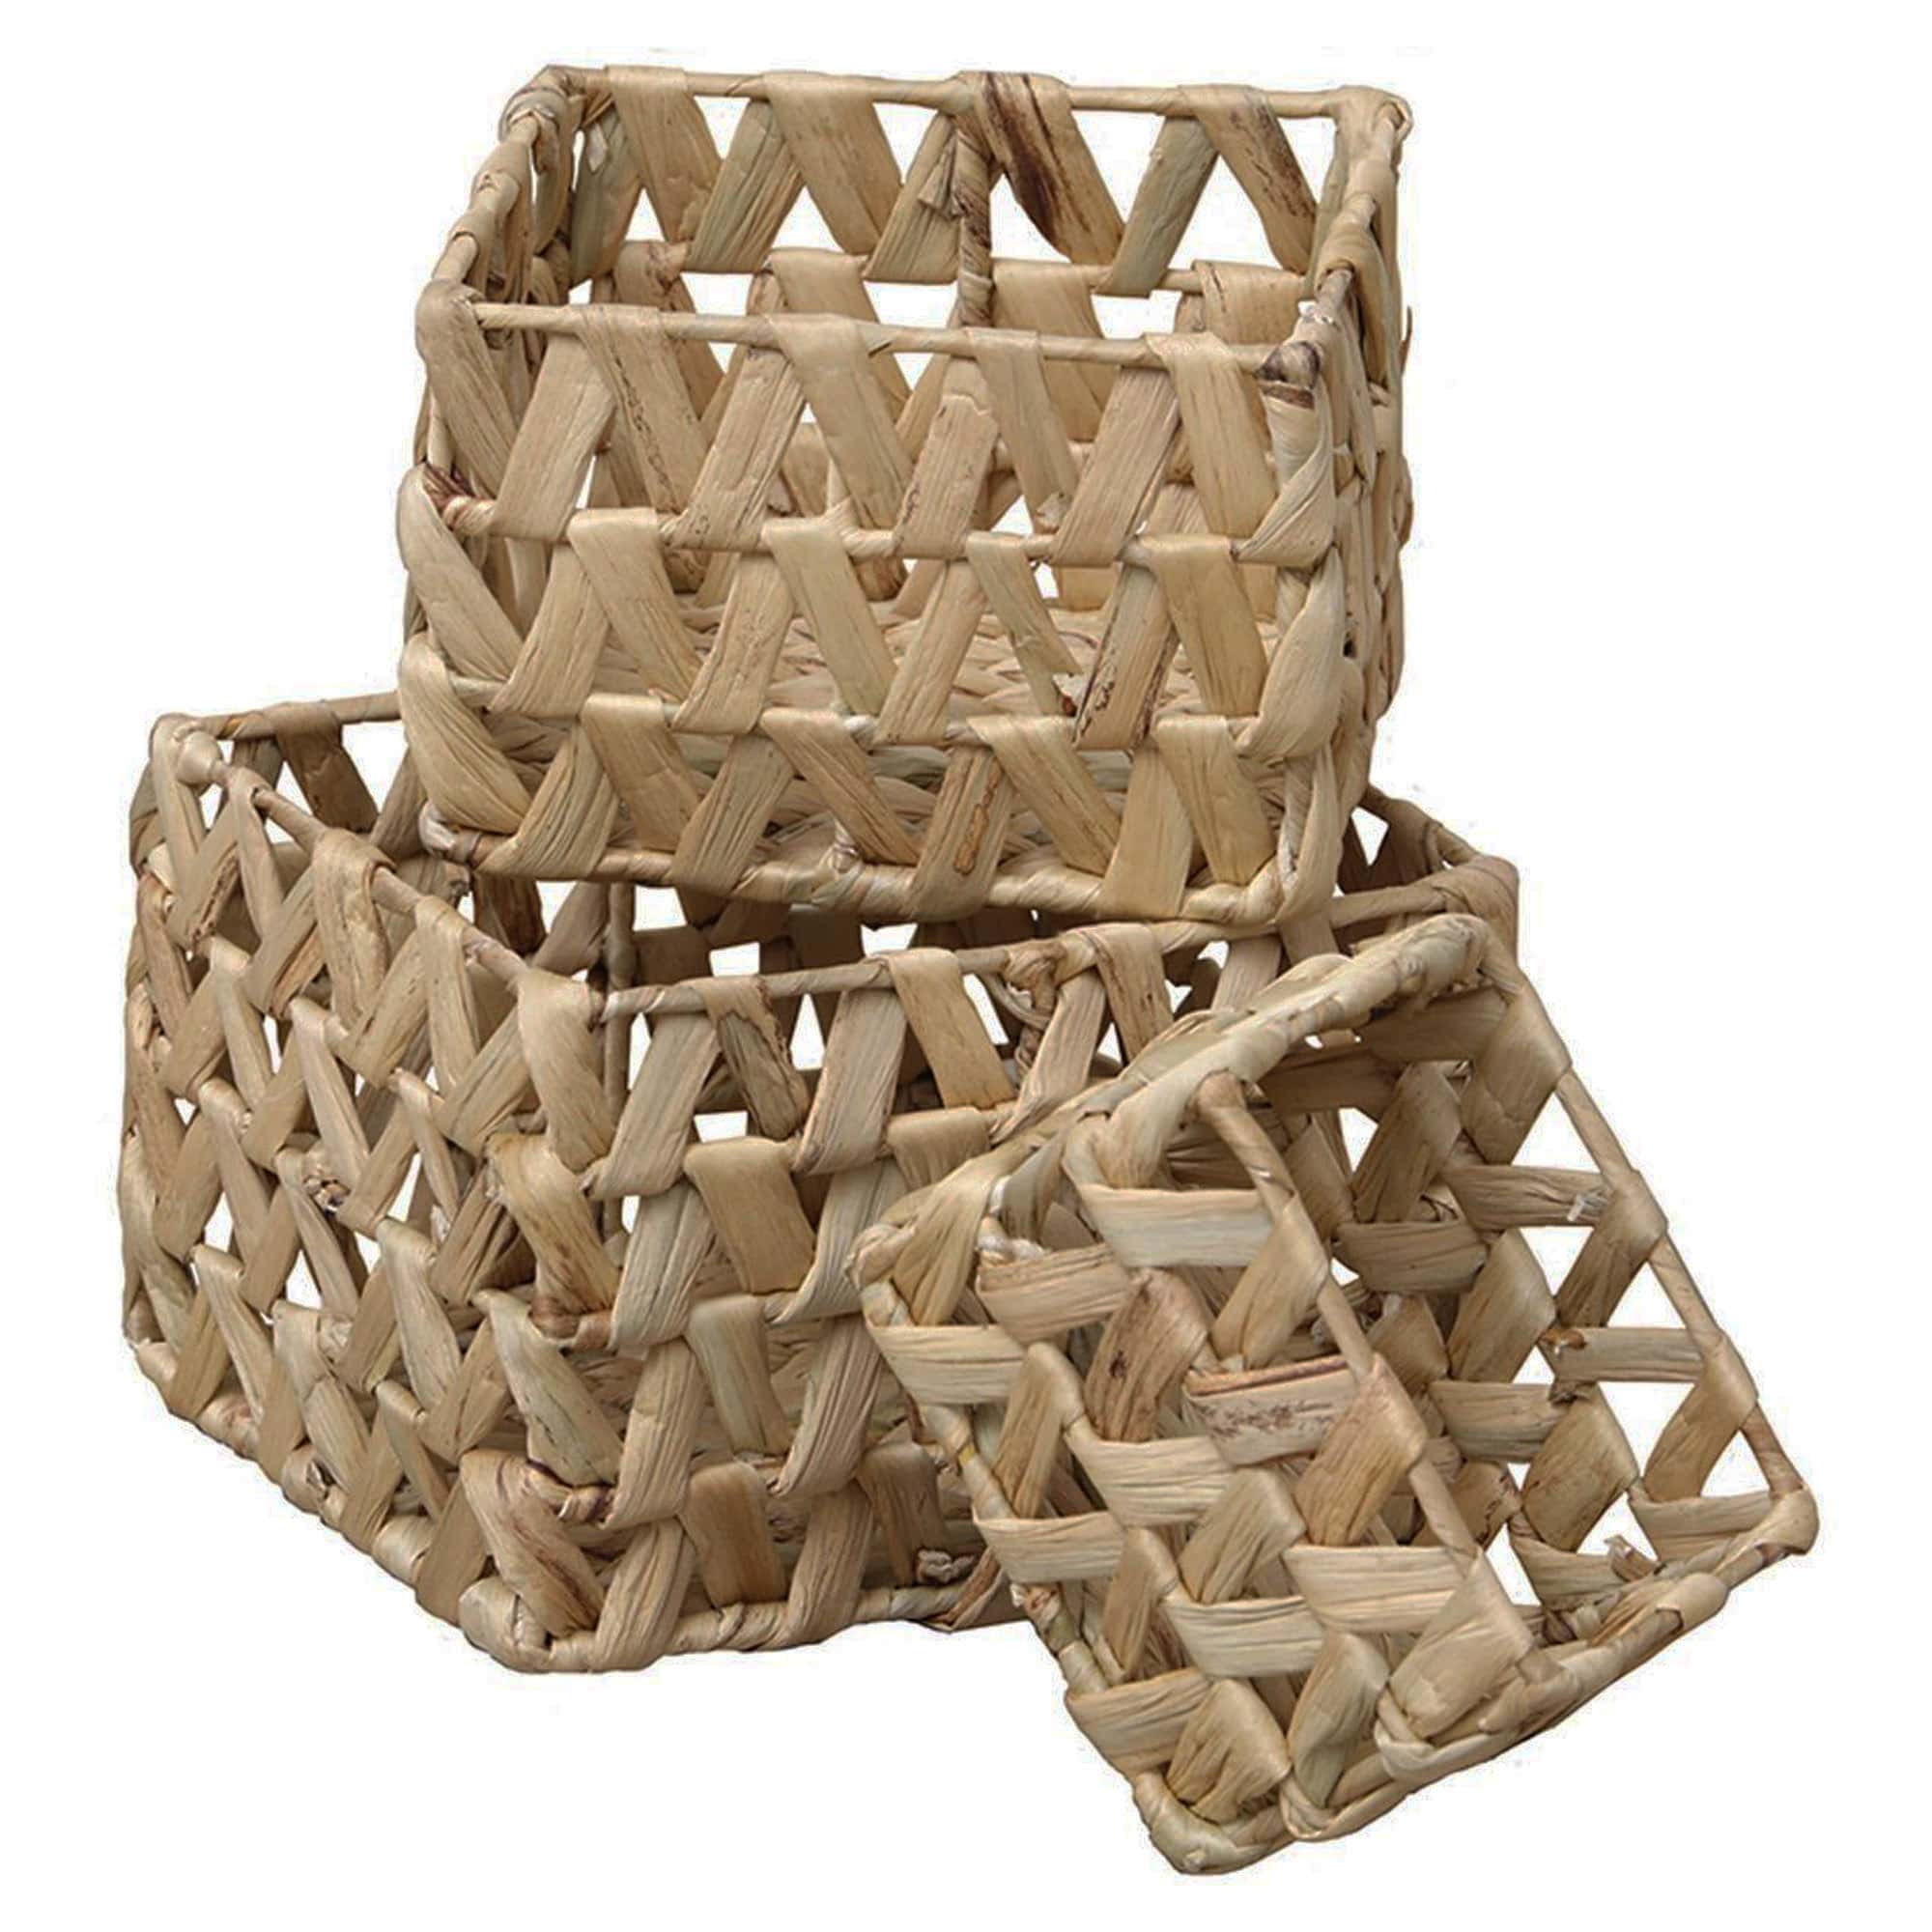 https://evideco.com/wp-content/uploads/2022/12/84146104-Rectangular-Braided-Water-Hyacinth-Baskets-With-Handles-Natural-Set-of-3-1-main.jpg